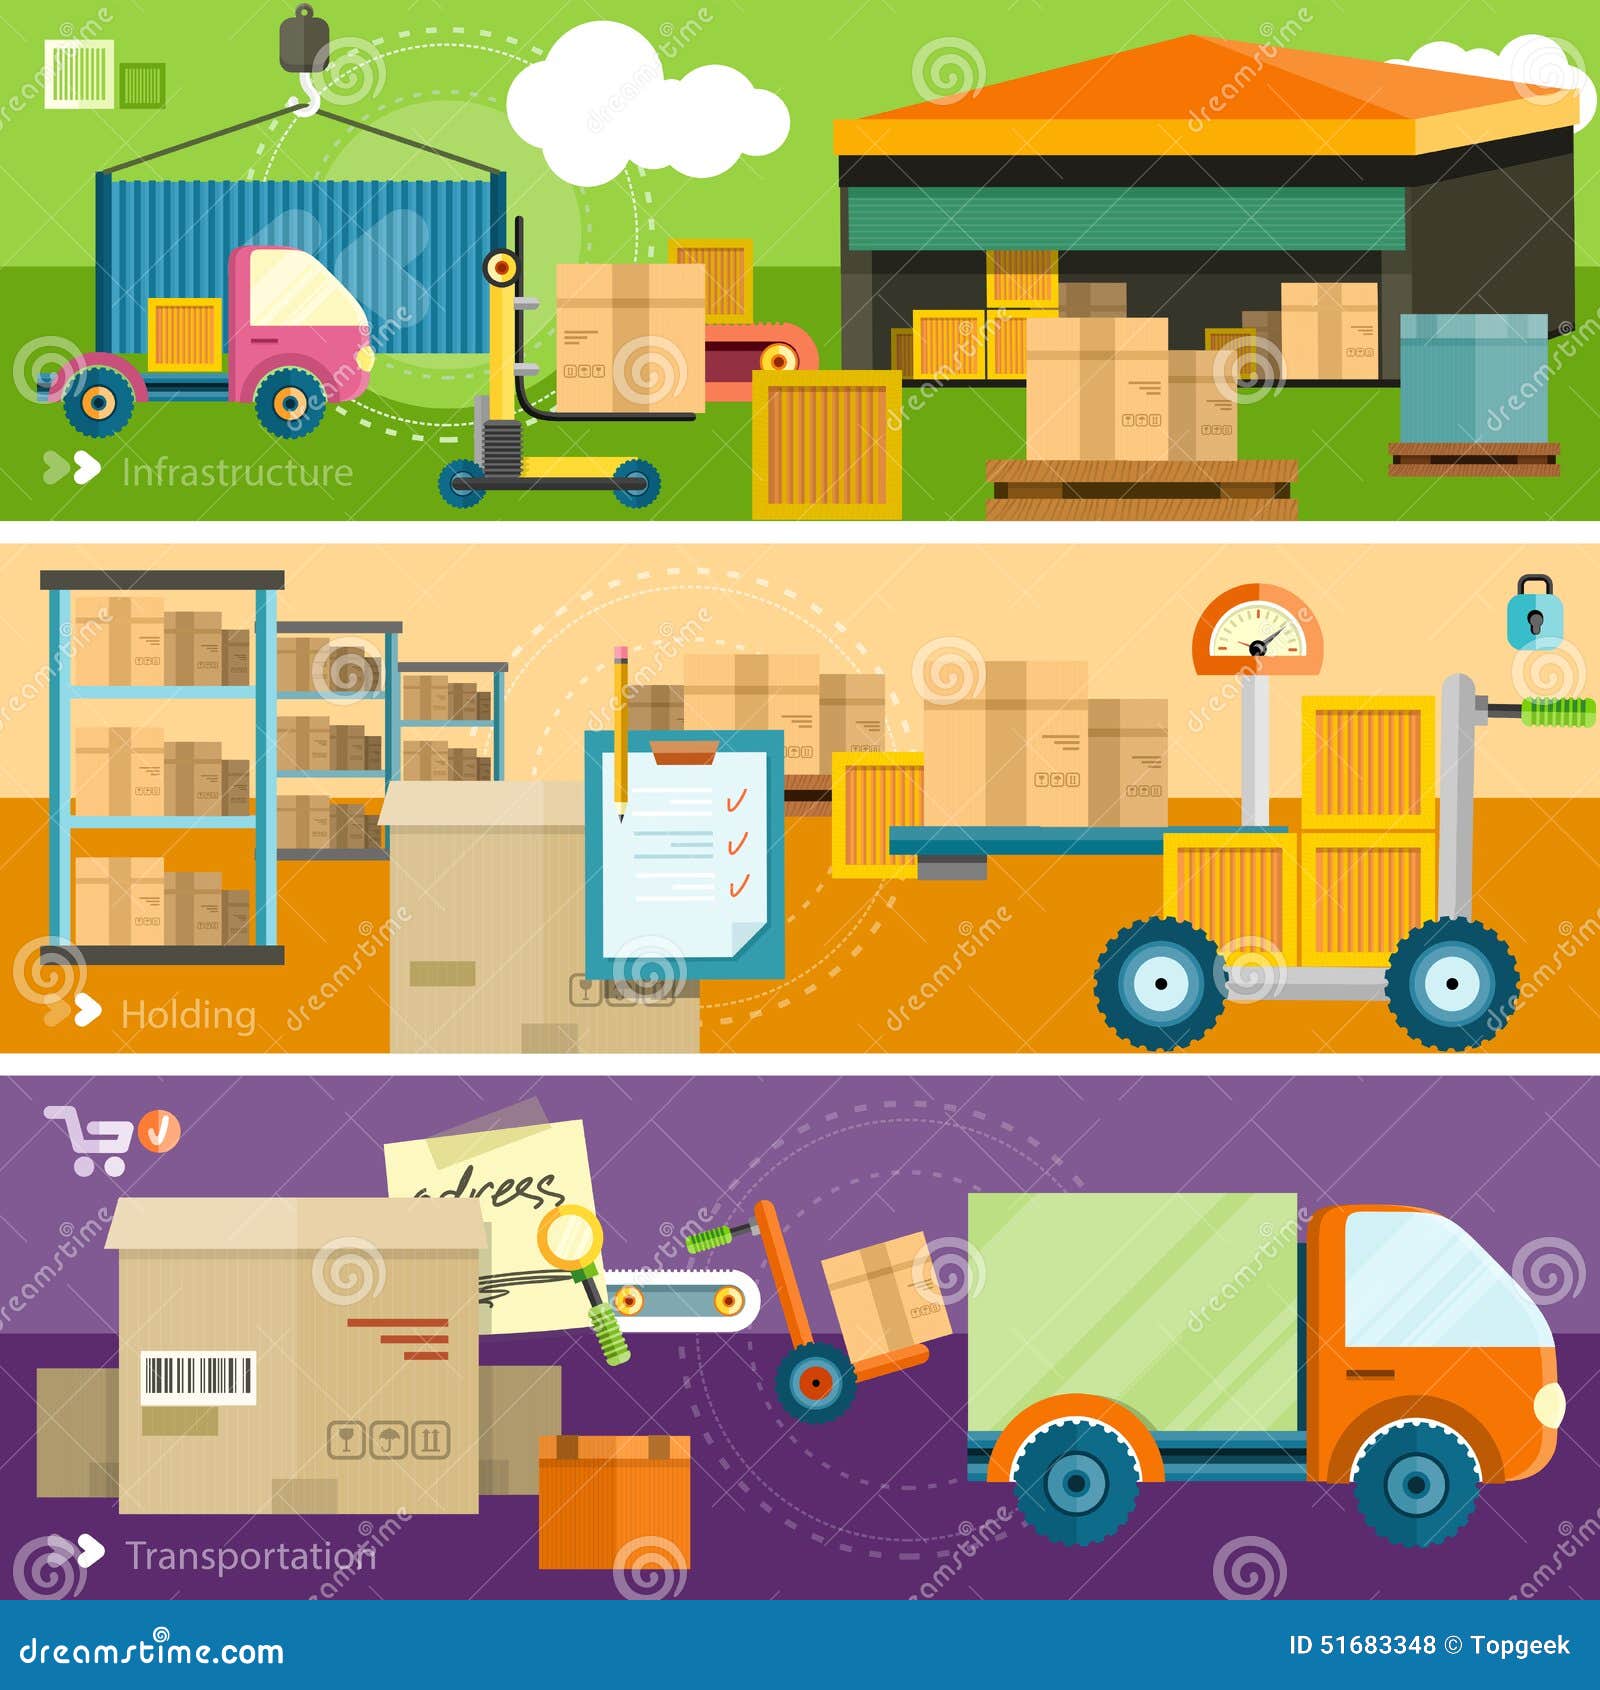 Delivery shipping concept stock vector. Illustration of packing - 51683348